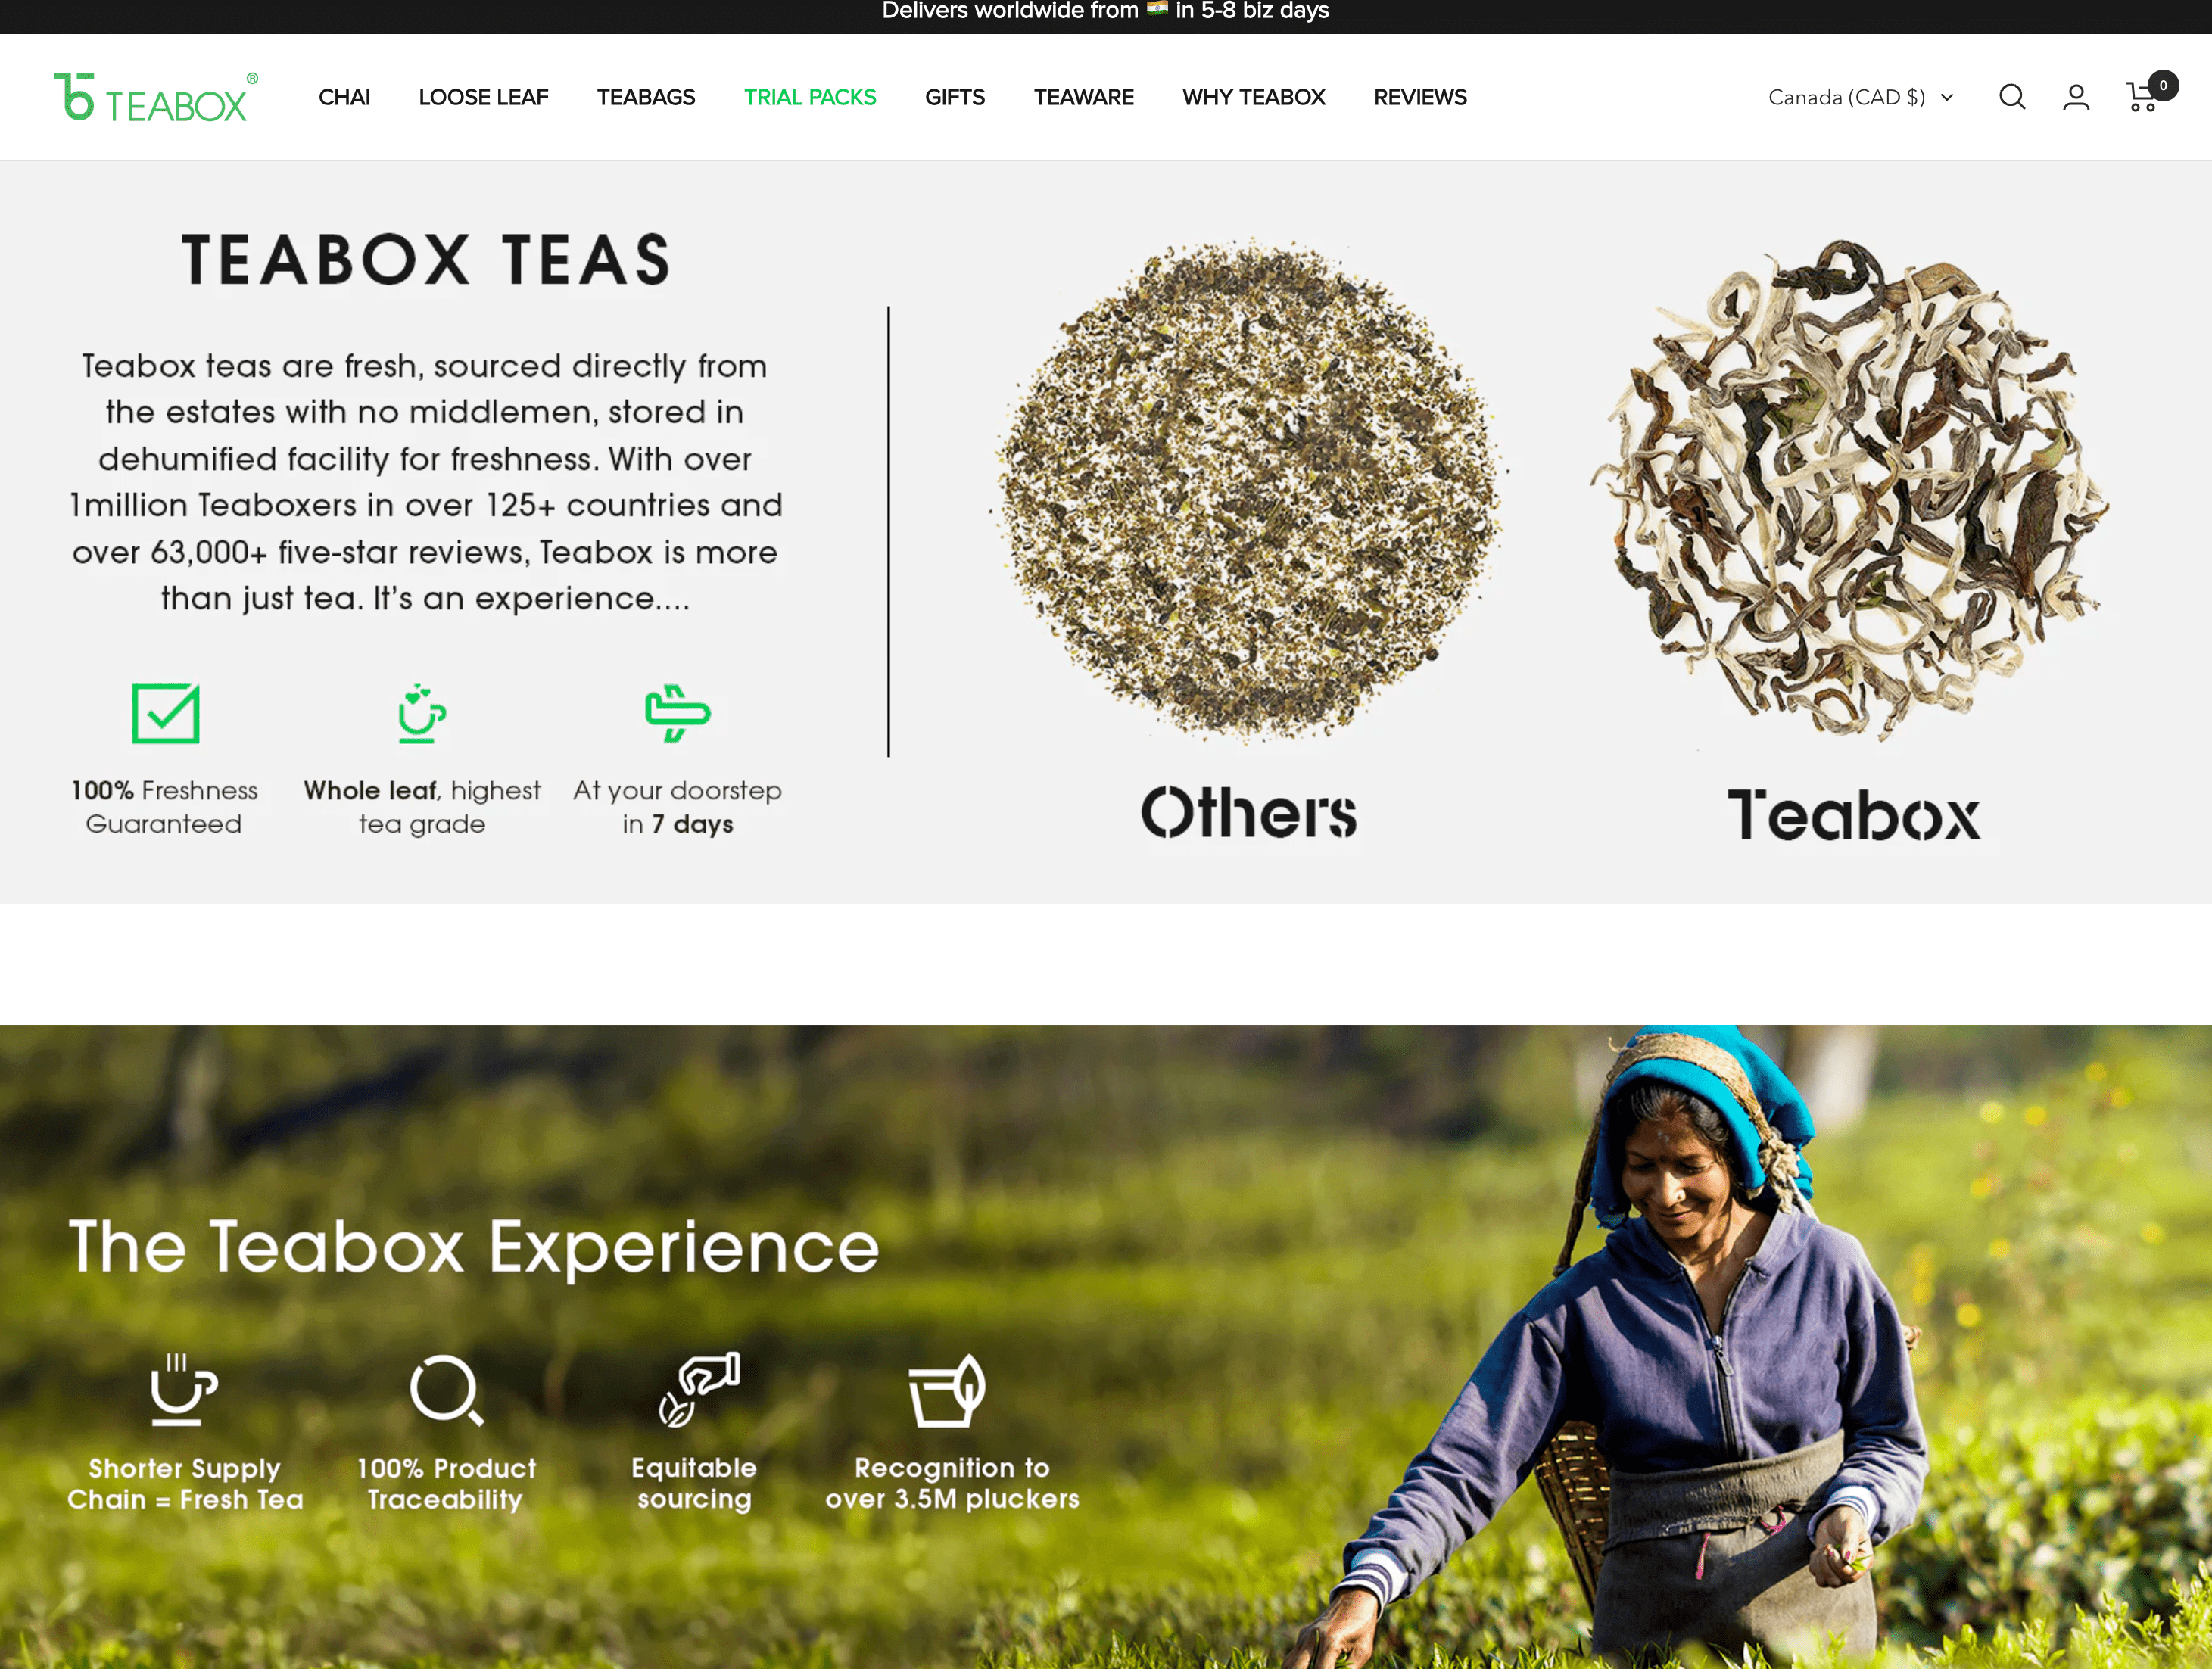 Mental Wellness Brands for World Mental Health Day–A screenshot of Teabox’s homepage with an explanation of the differences between competitor tea brands and Teabox’s products. There is a section below that explains The Teabox Experience in terms of its shorter supply chain, traceability, equitable sourcing, and recognition to over 3.5 million pluckers, with an image of a tea plucker at work in a field.